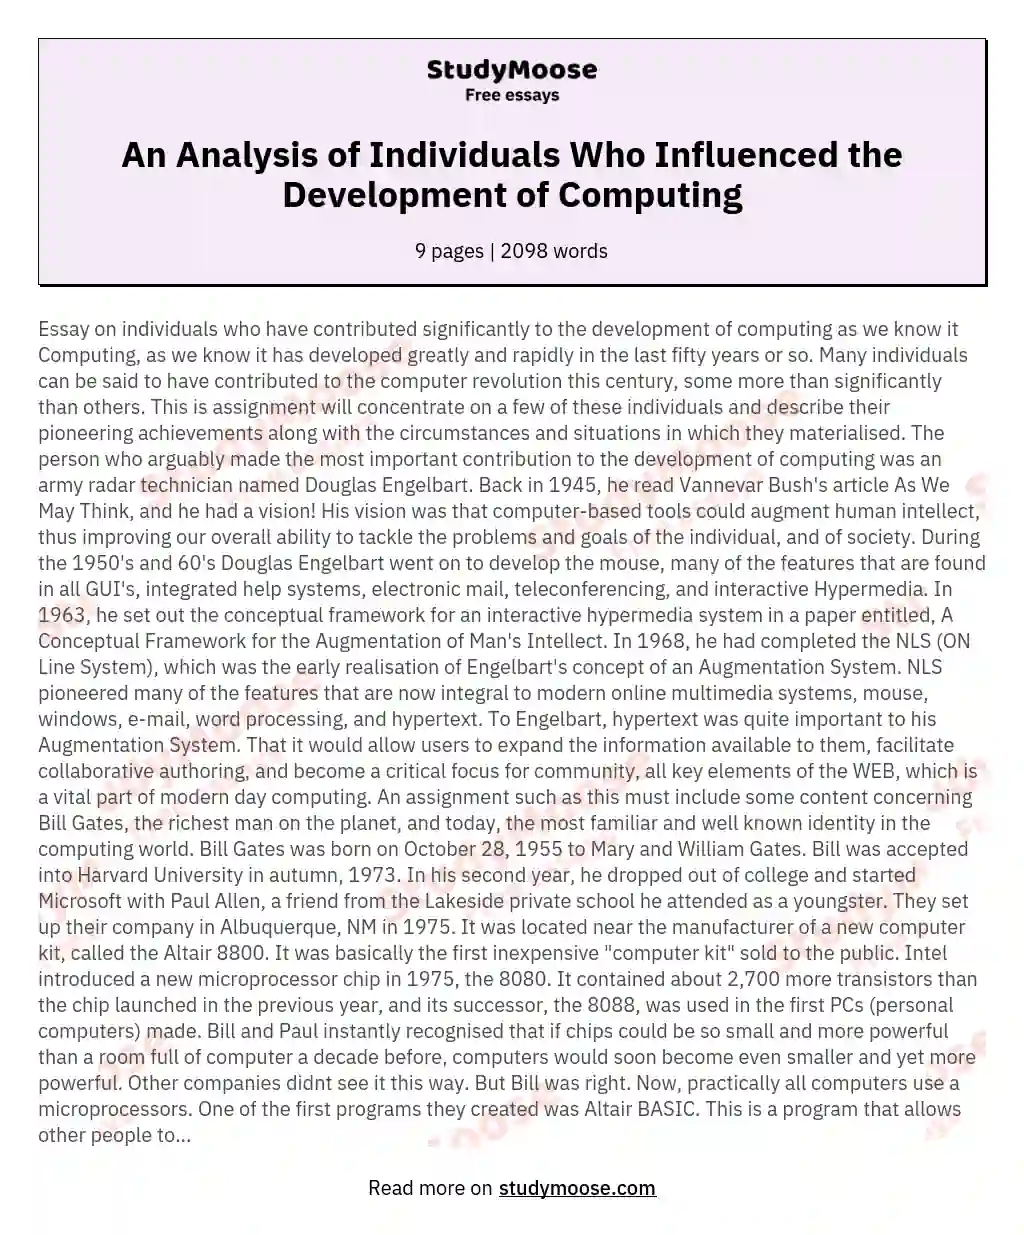 An Analysis of Individuals Who Influenced the Development of Computing essay